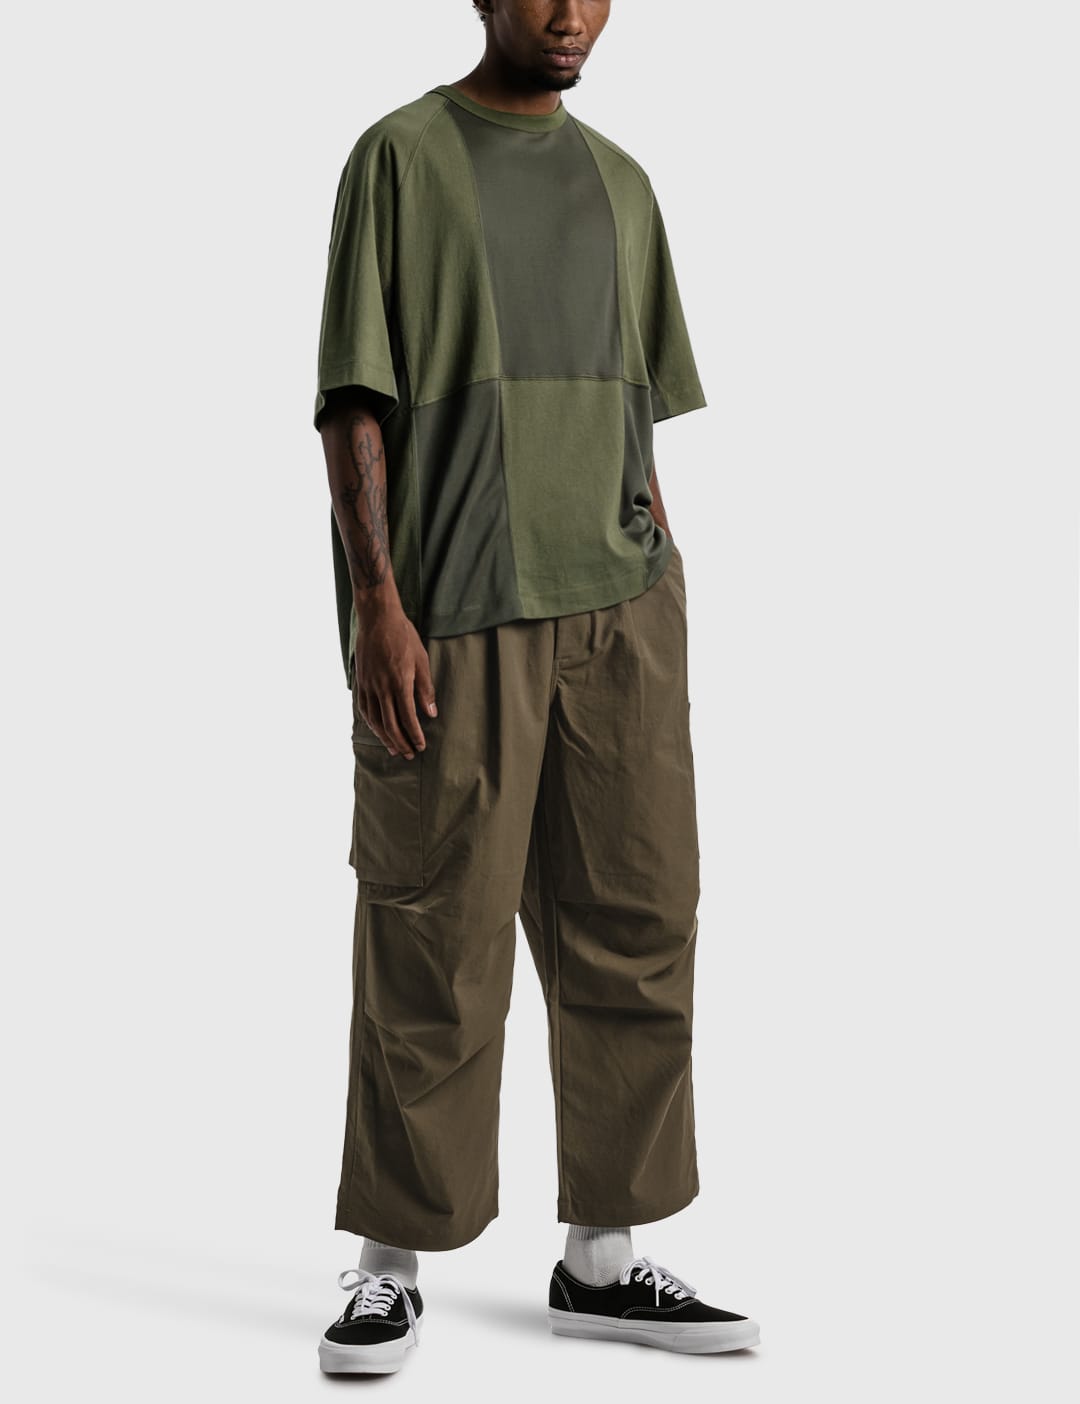 TIGHTBOOTH - Tech Twill Cargo Pants | HBX - Globally Curated